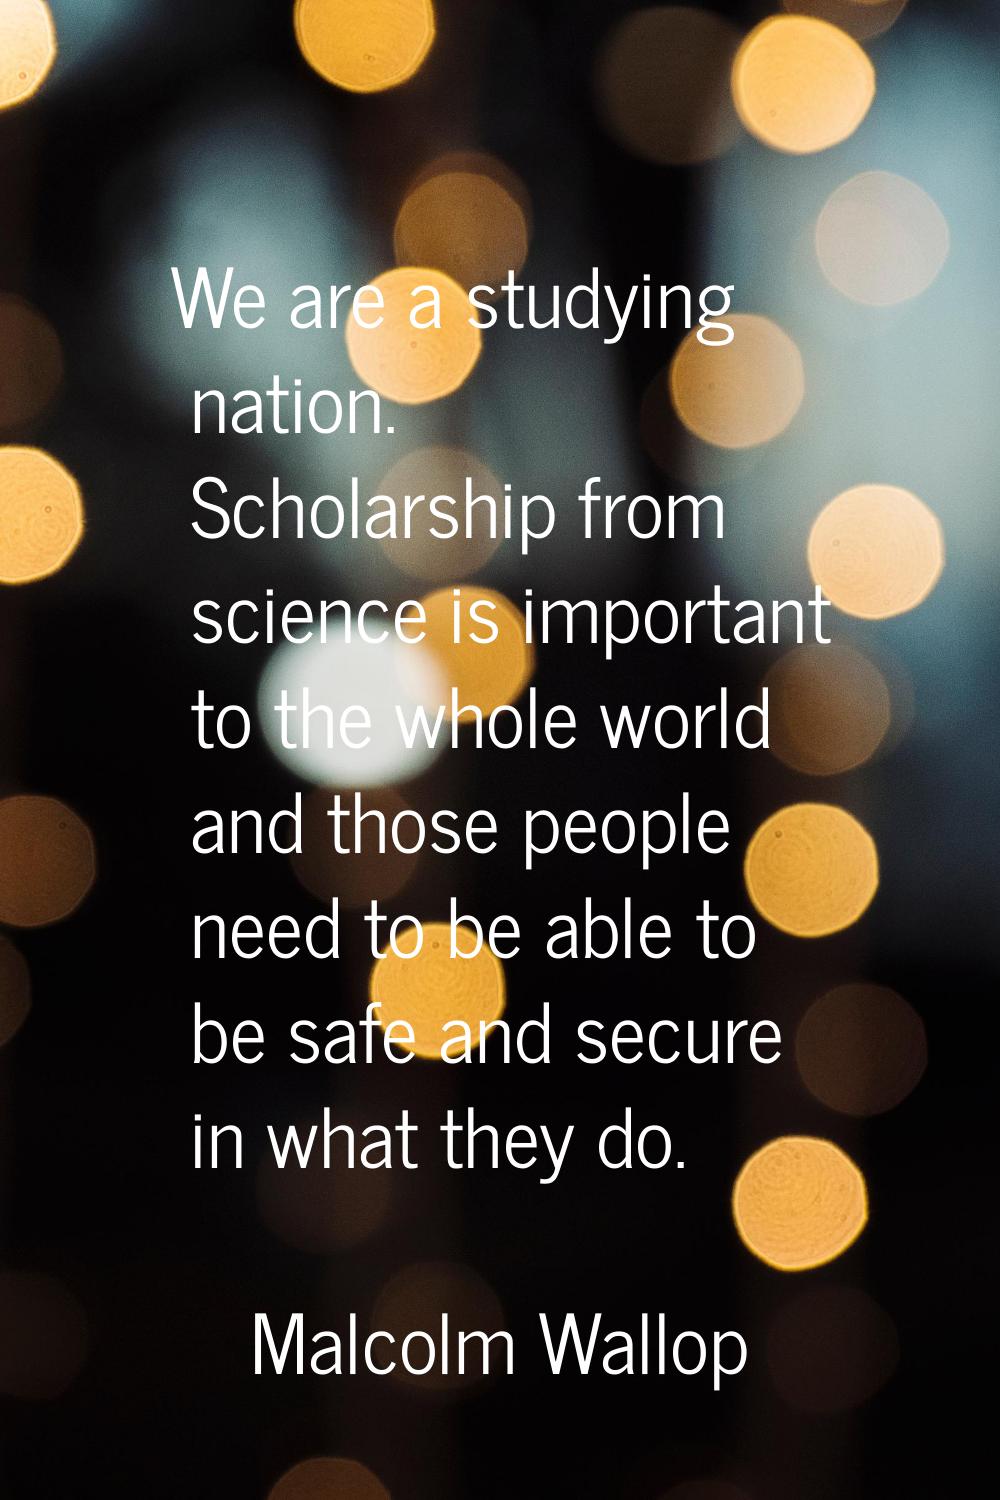 We are a studying nation. Scholarship from science is important to the whole world and those people